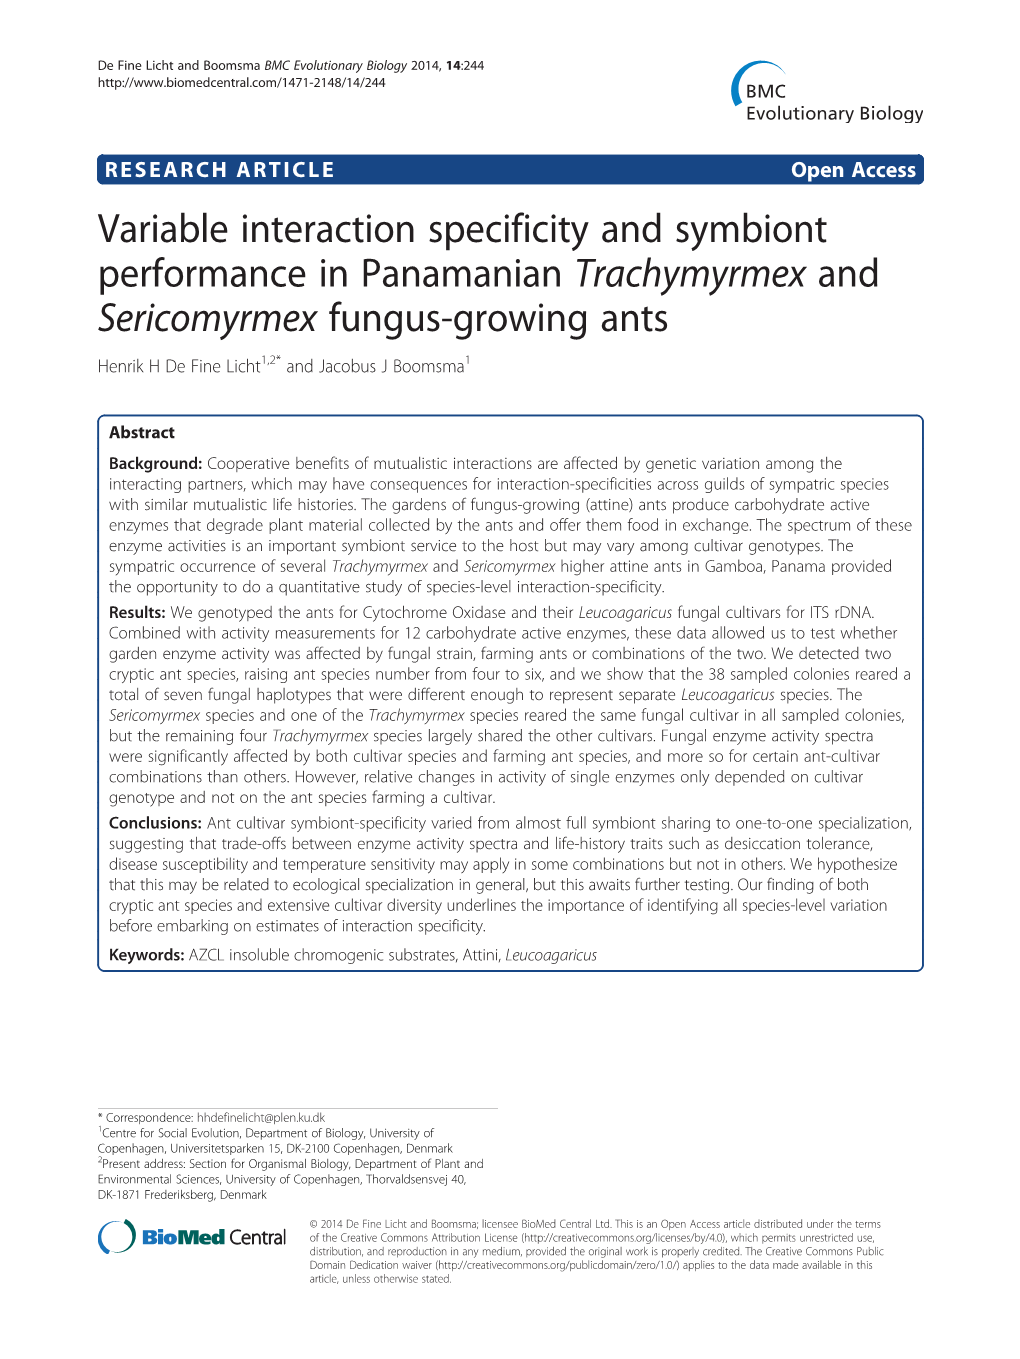 Variable Interaction Specificity and Symbiont Performance In